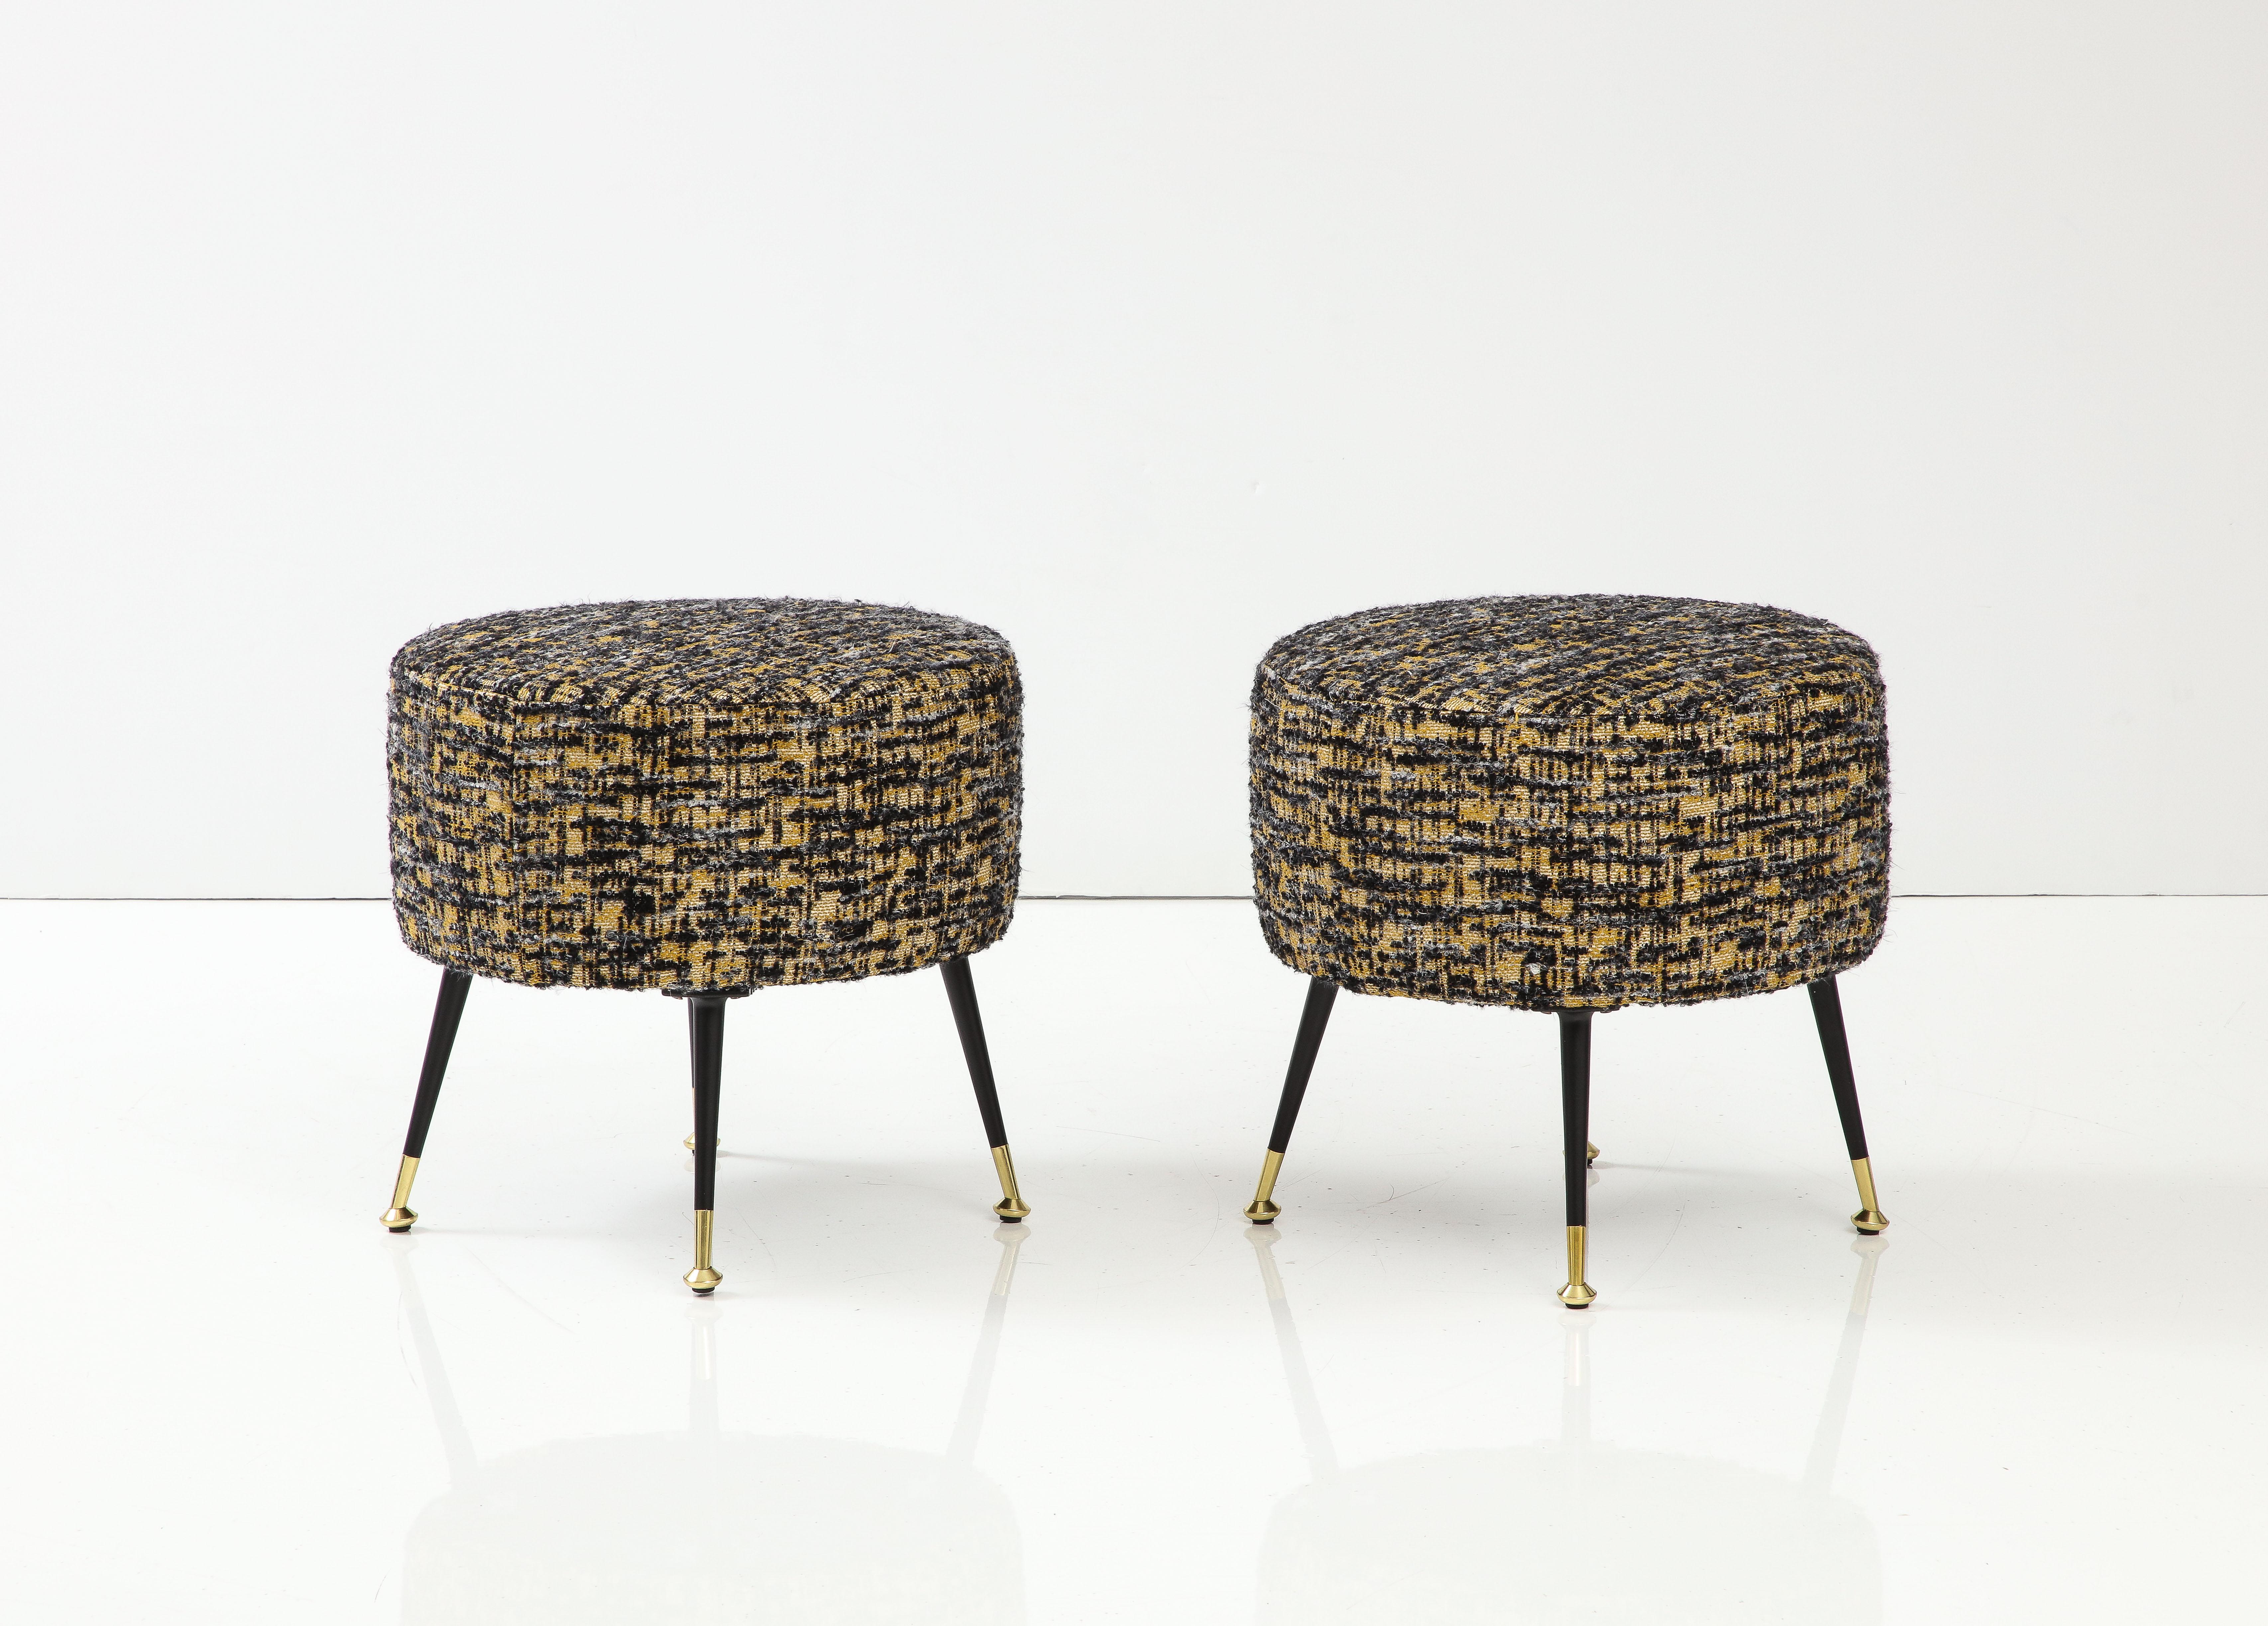 Pair of round stools or poufs handmade in Florence, Italy, by a master furniture artisan. Round seats upholstered in variegated boucle fabric by Dedar in black, muted yellow and ivory hues with lacquered black lacquered steel and brass legs. This